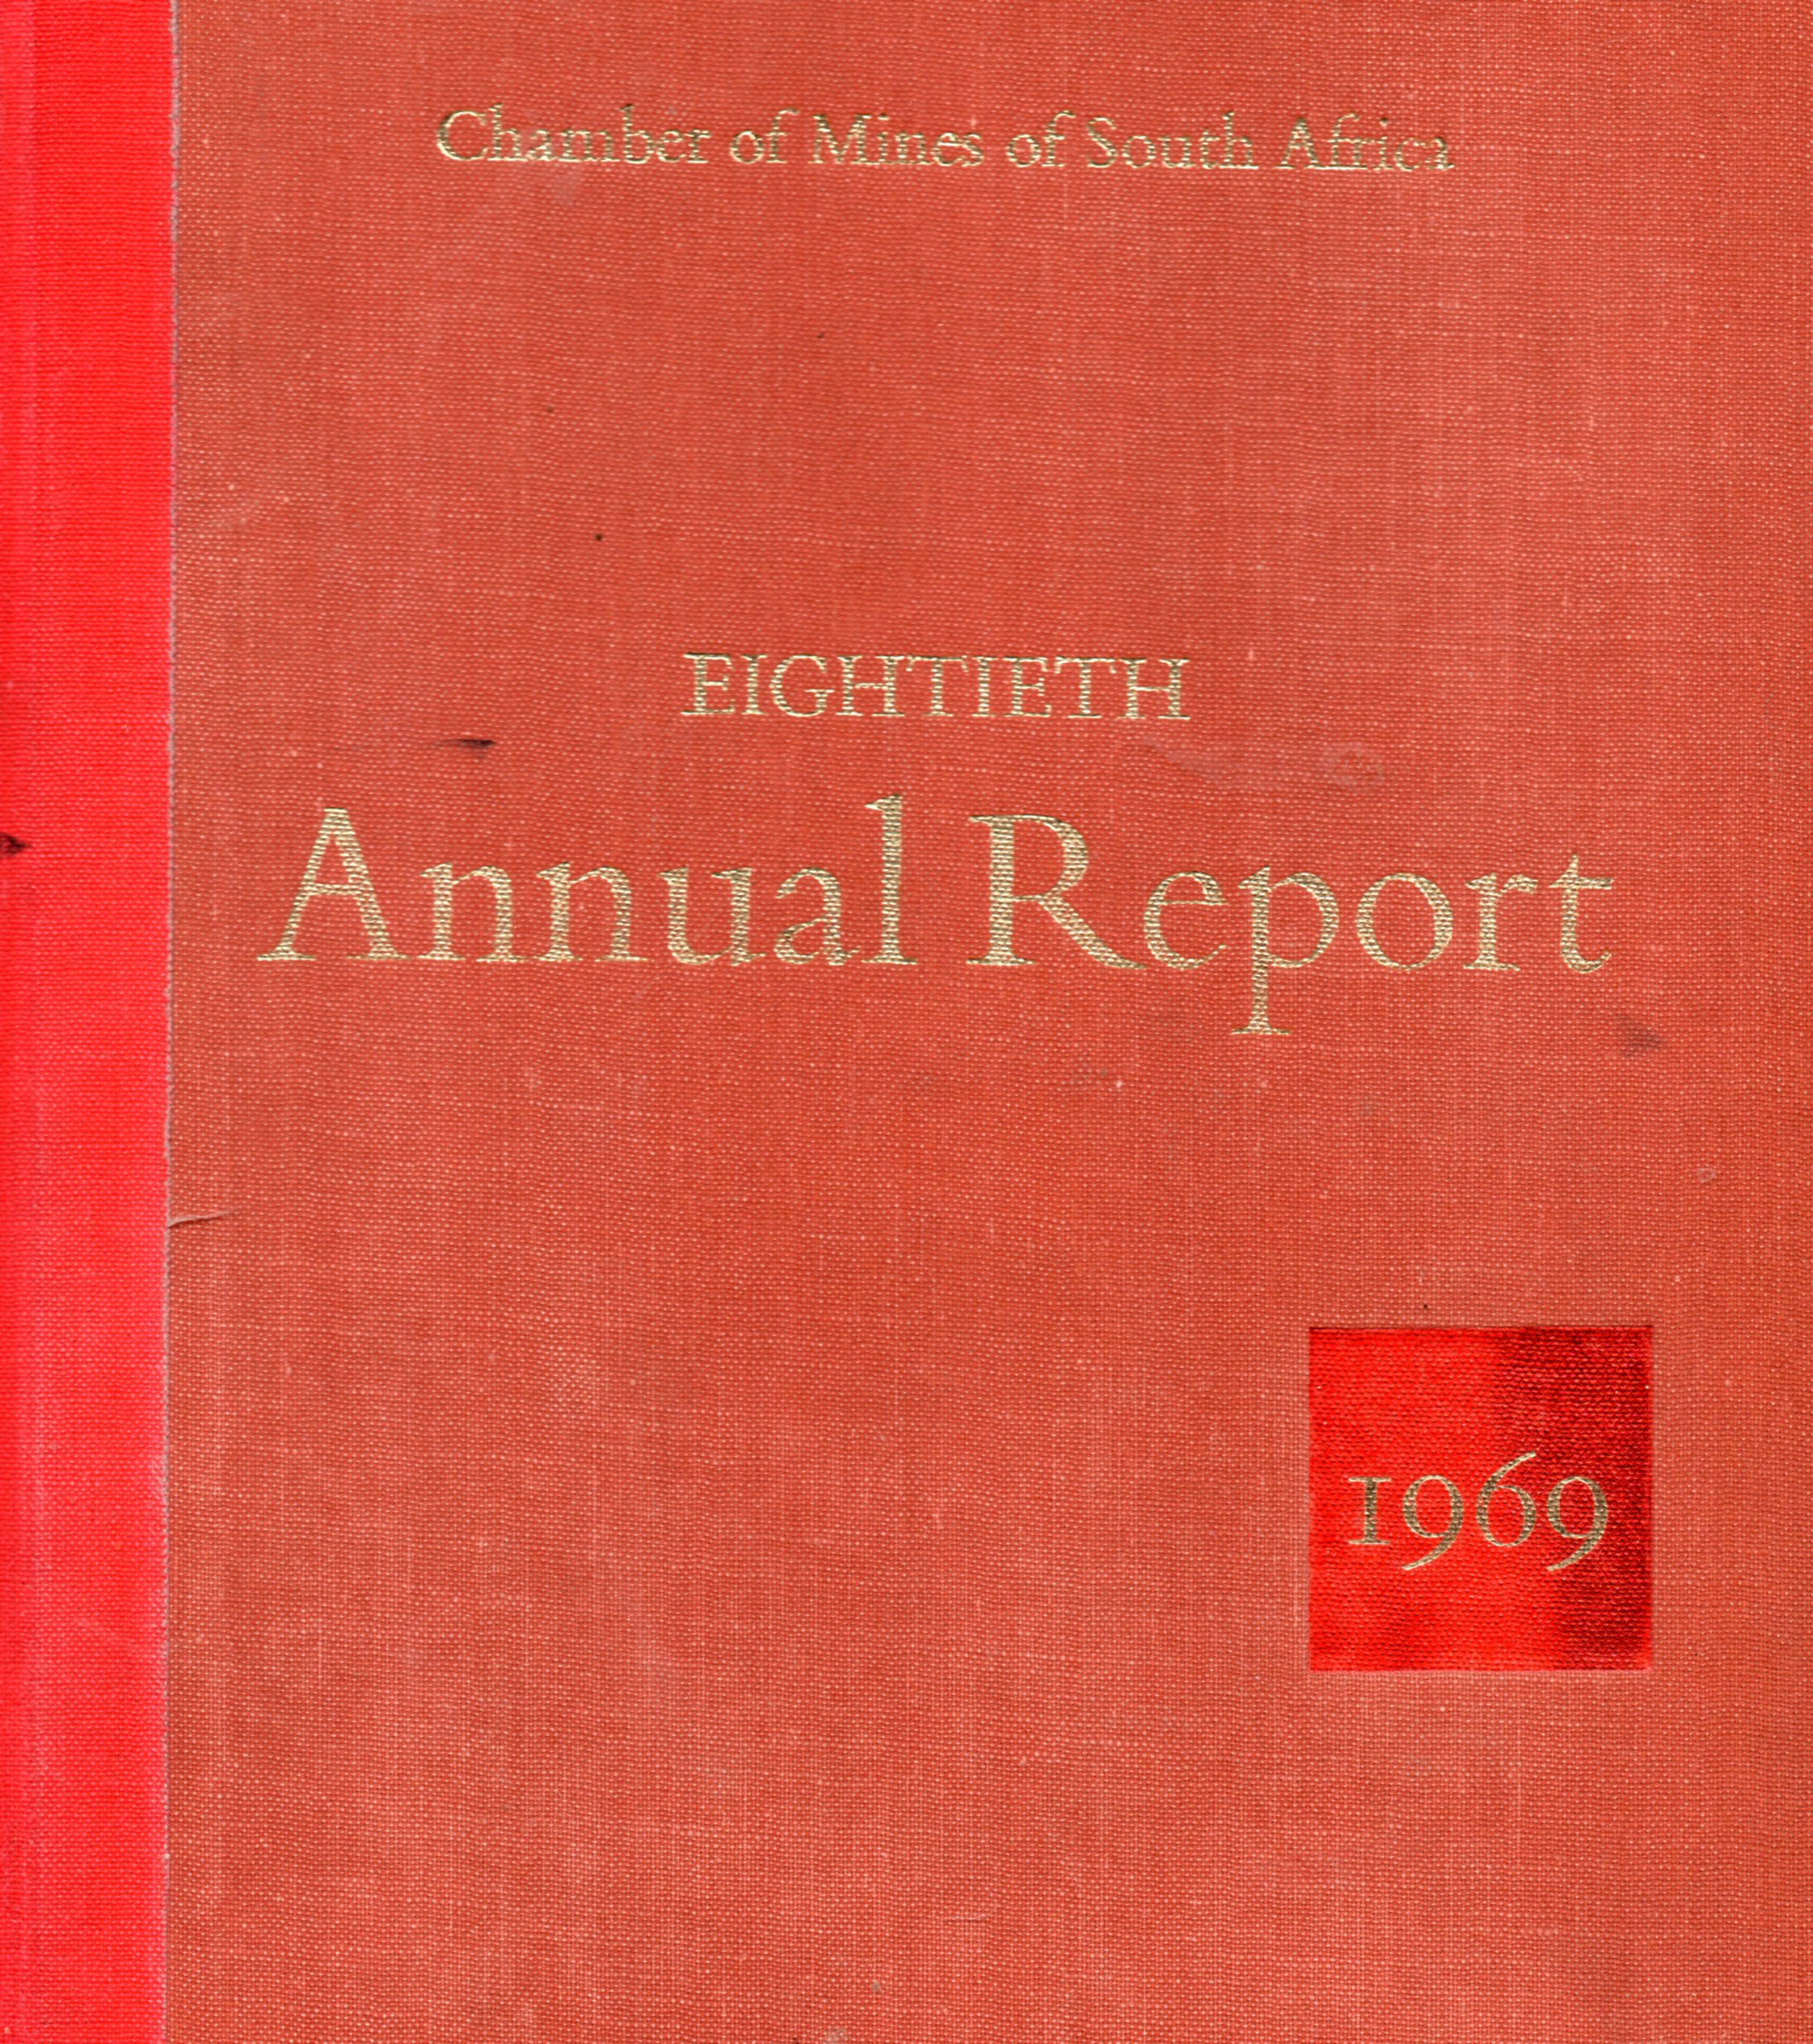 [USED] Chamber of Mines Of South Africa - Eightieth Annual Report